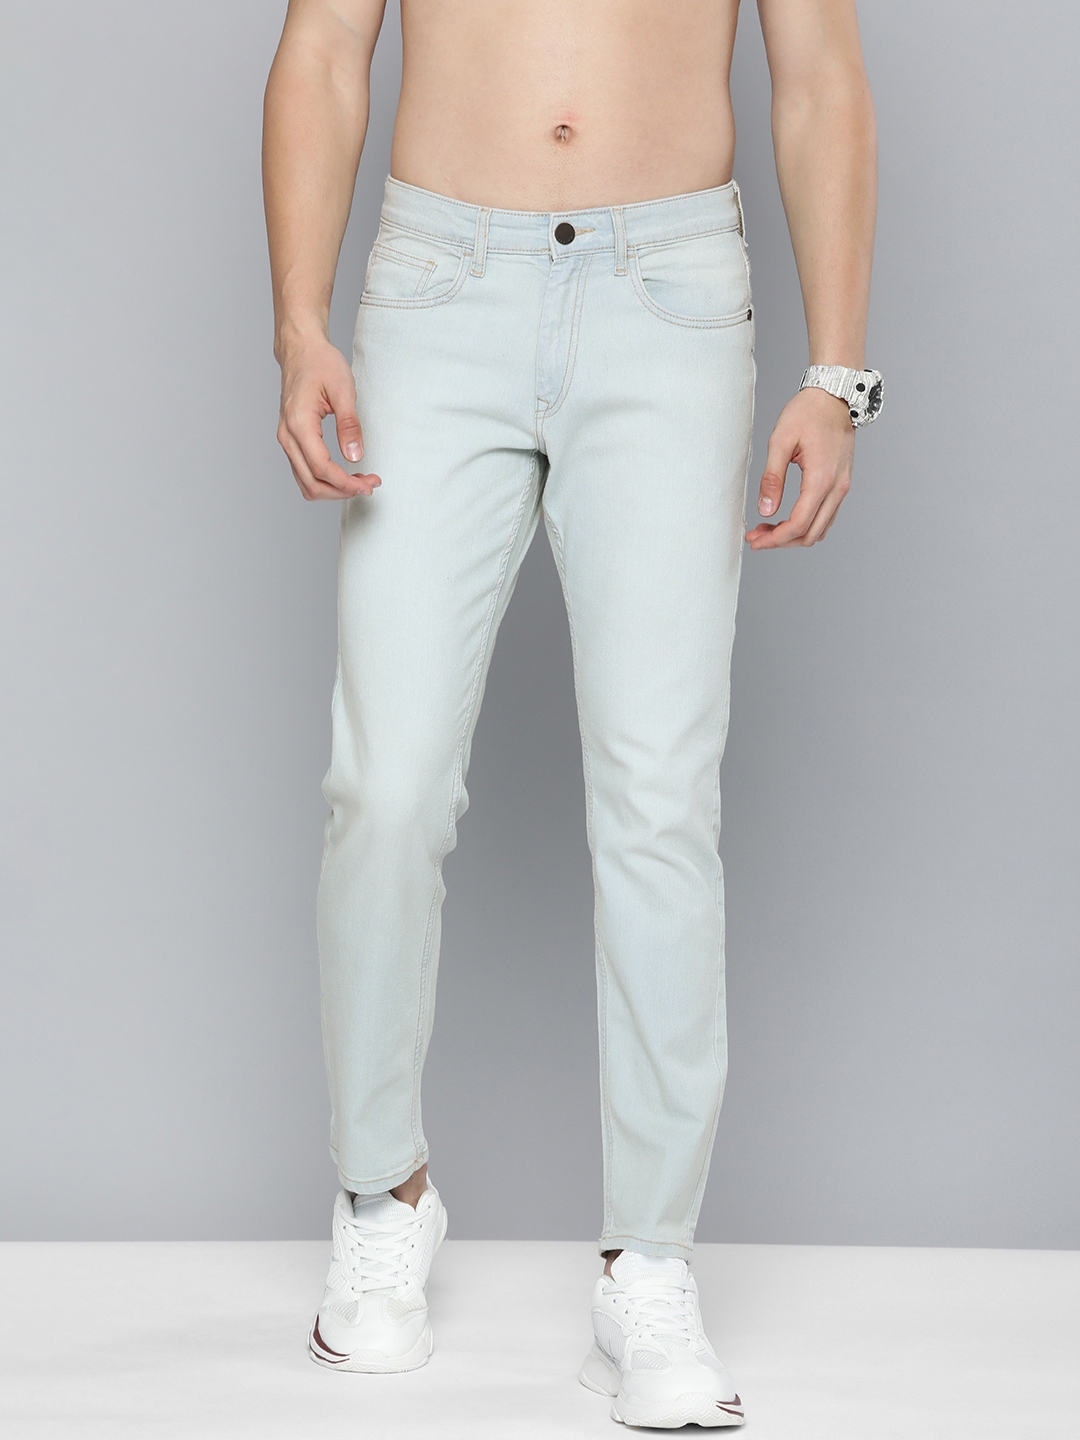 Buy HERE&NOW Men Blue Stretchable Jeans - Jeans for Men 16622422 | Myntra